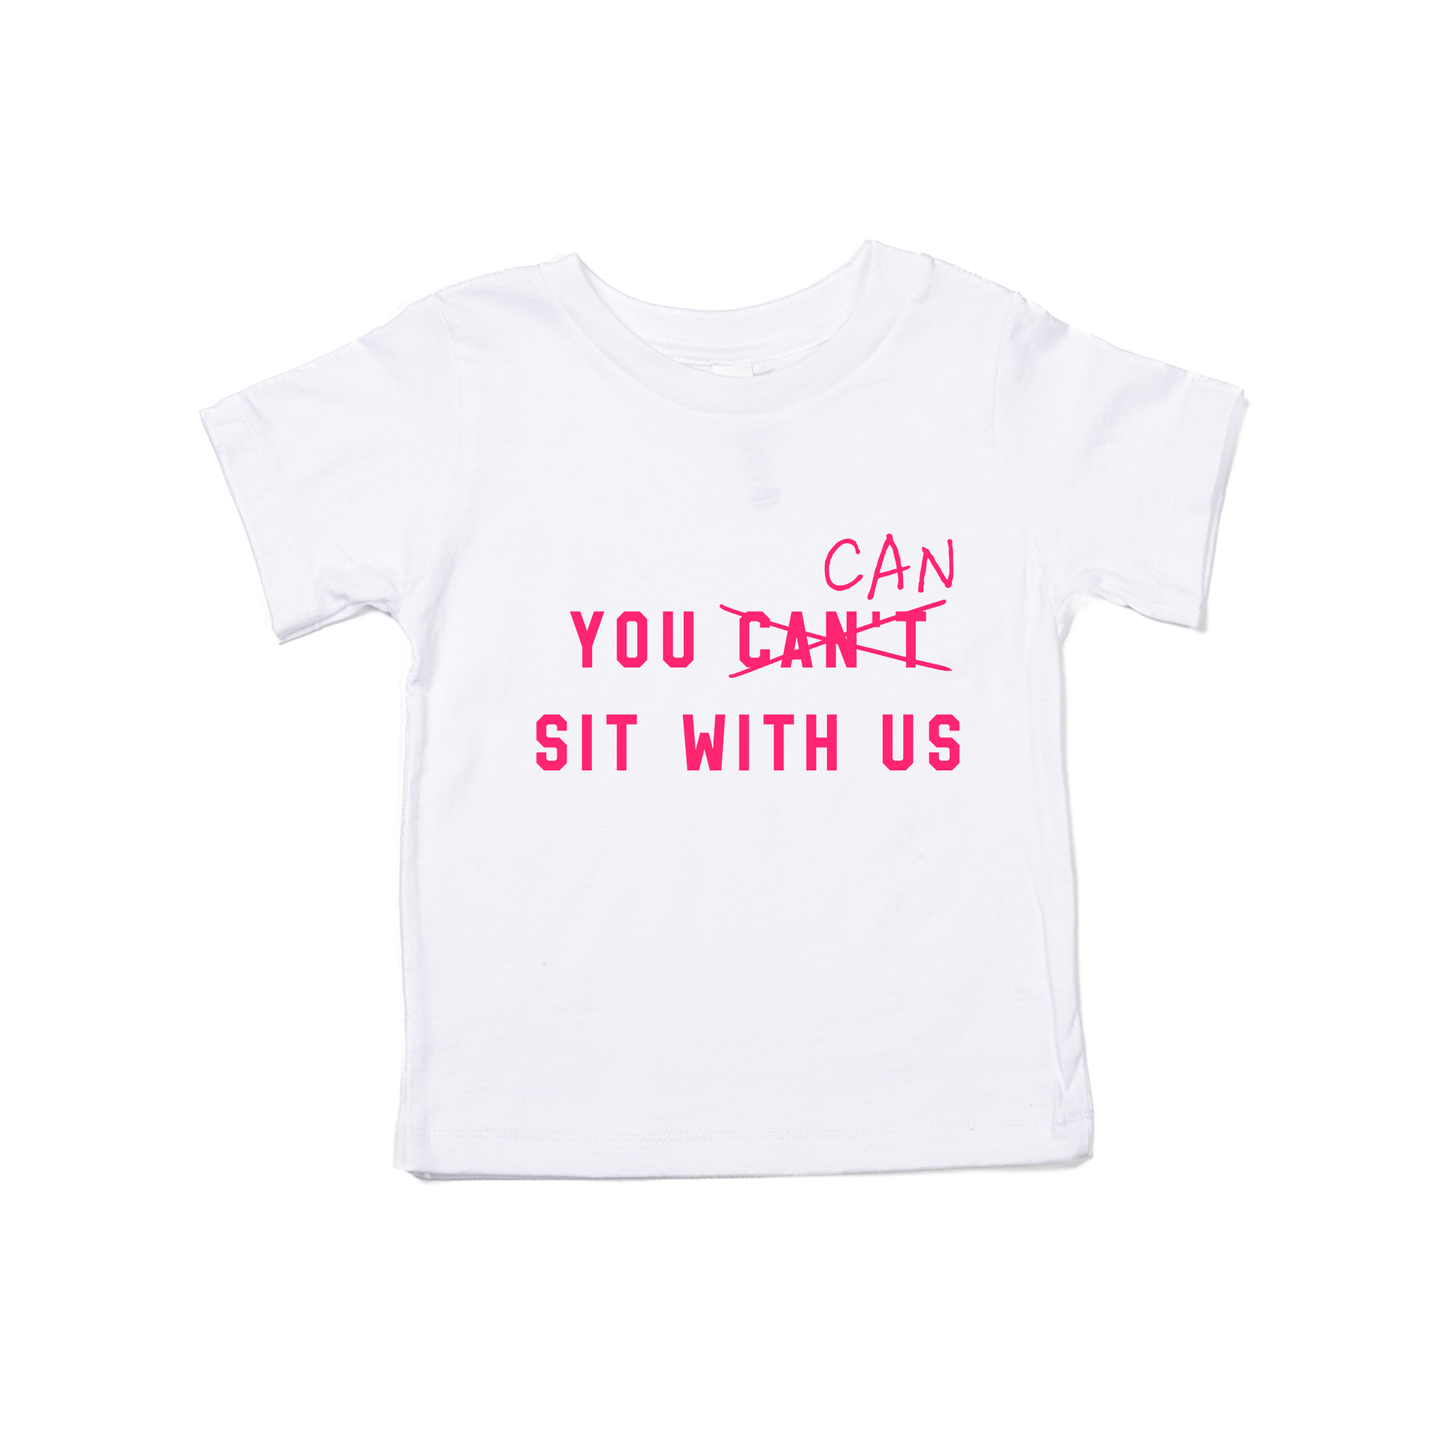 You can sit with us (Hot Pink) - Kids Tee (White)